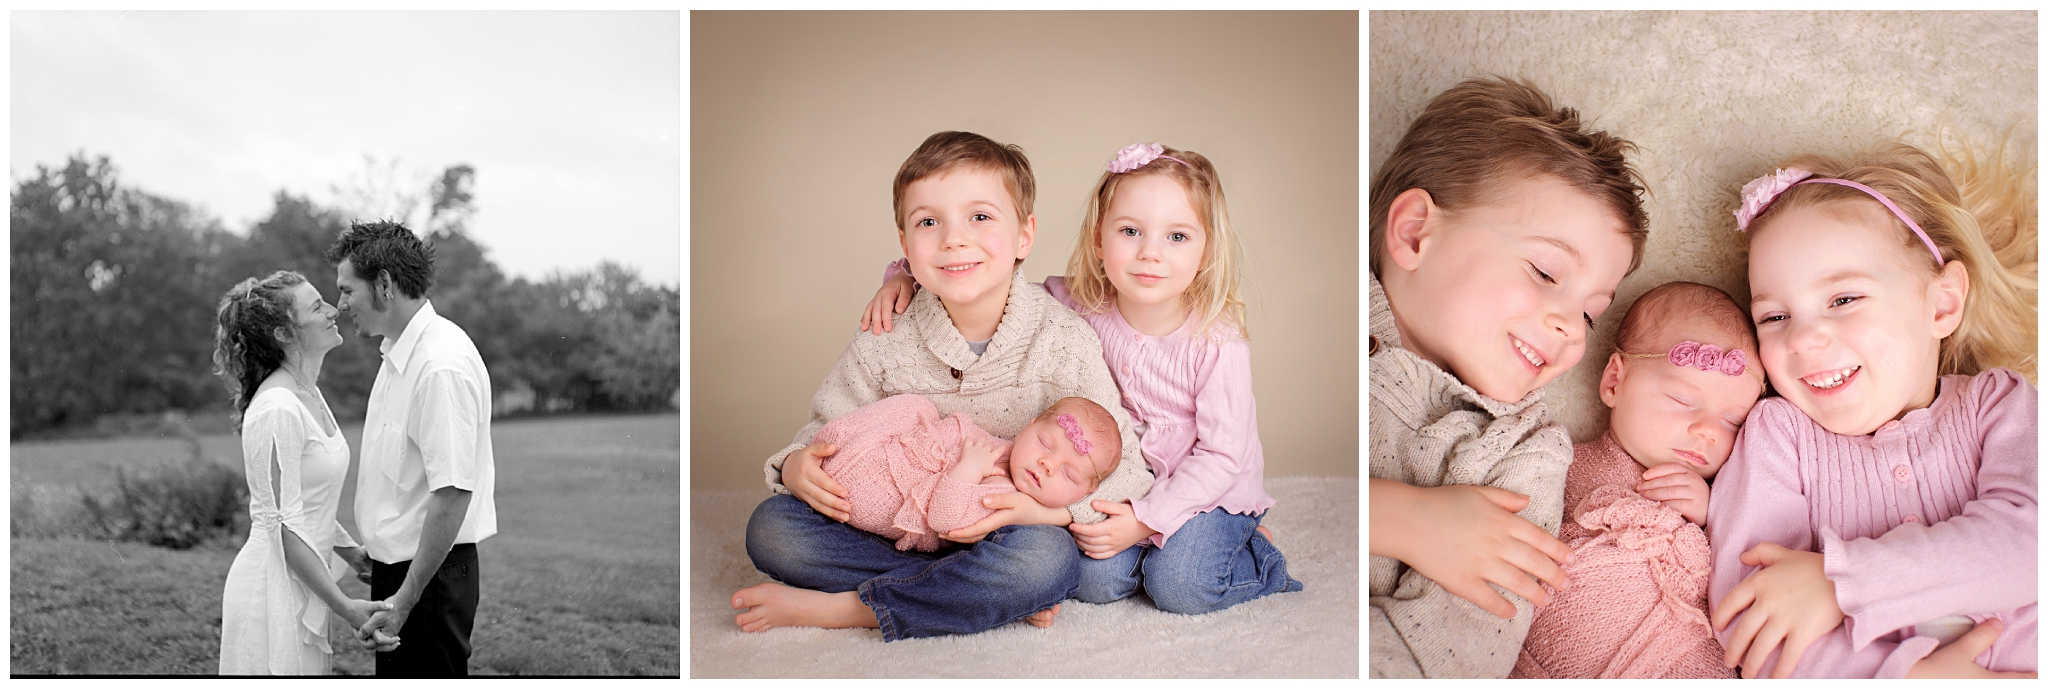 Family photographer in berks county pa